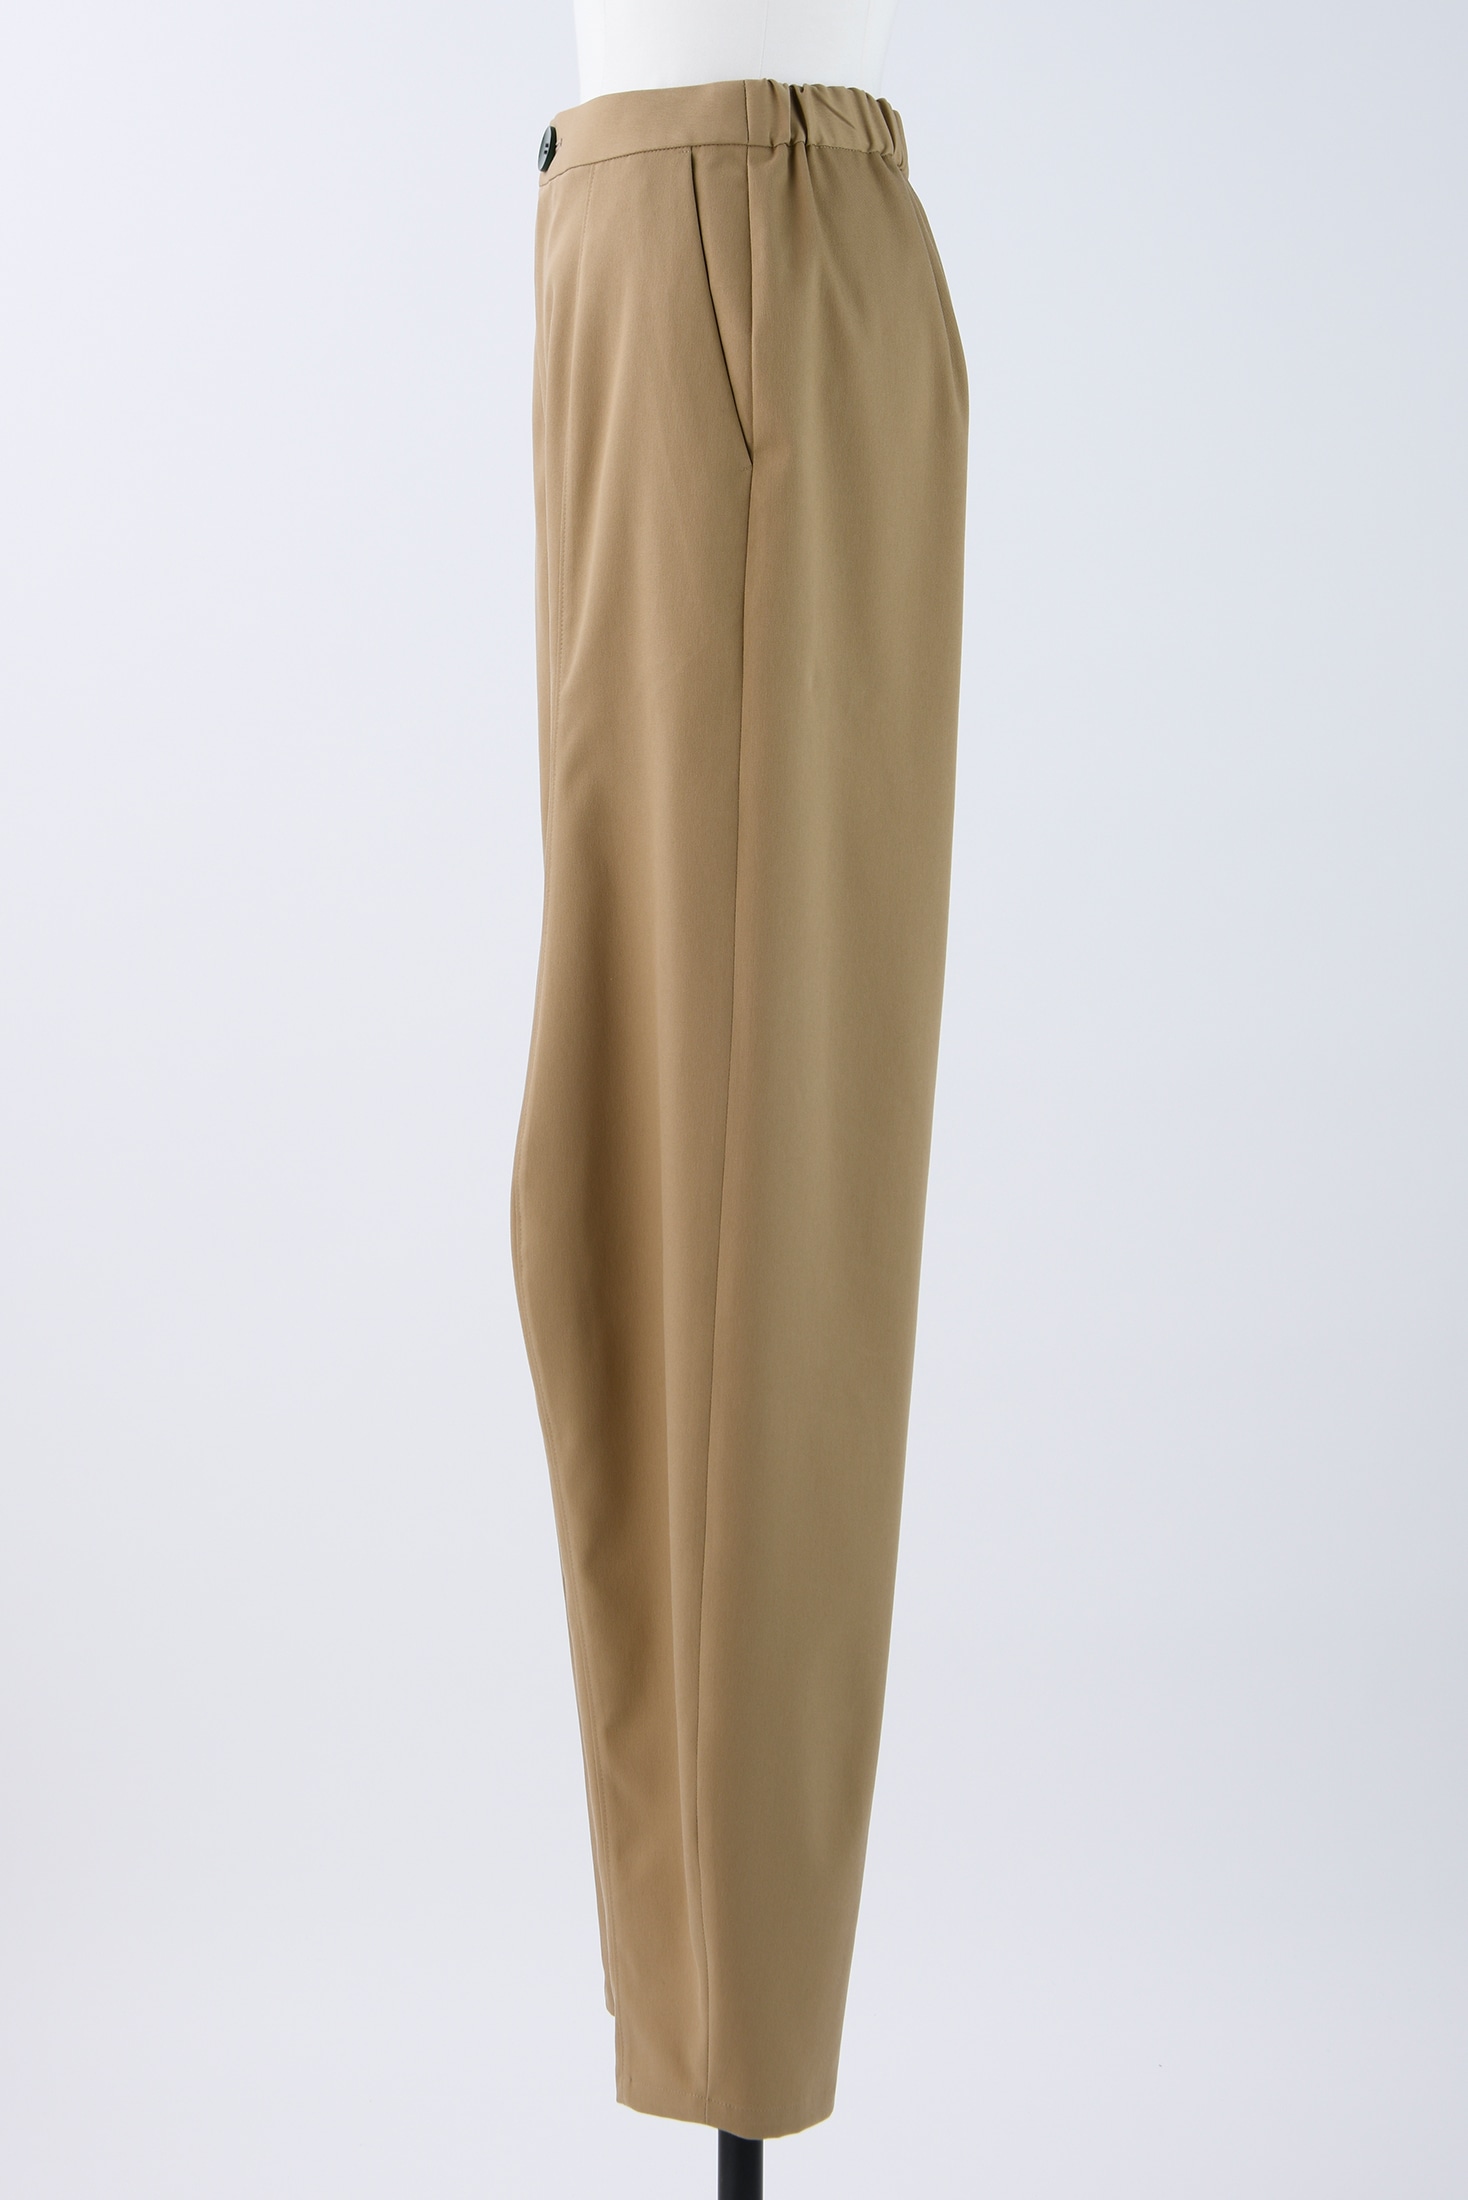 Women's Curve Love Tailored Straight Pant